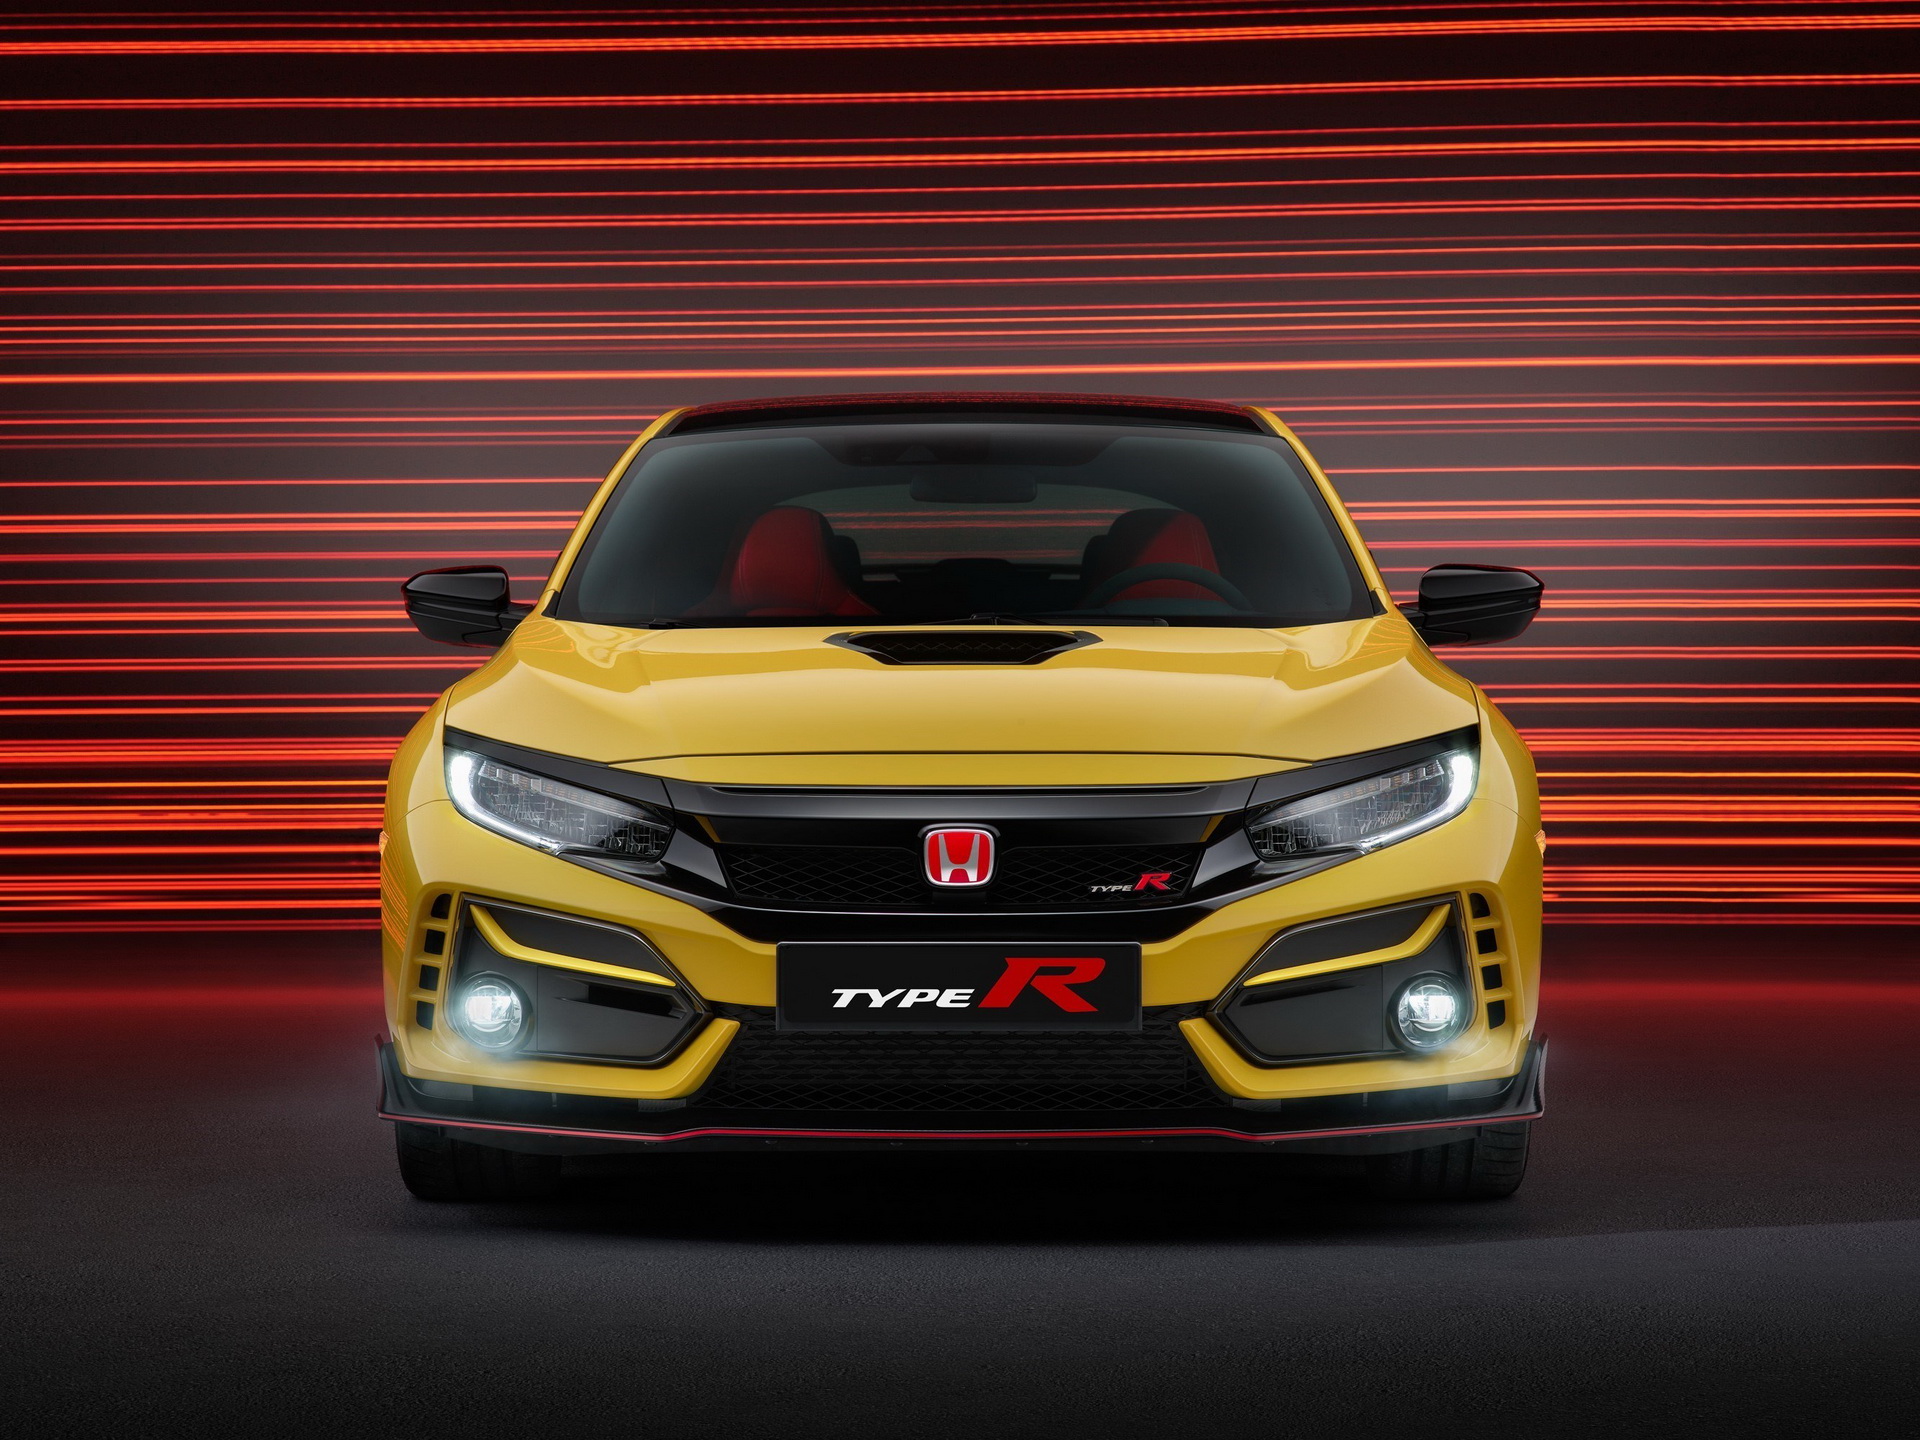 Honda S Updated Civic Type R Priced From 32 0 In The Uk Limited Edition Still Sold Out Carscoops